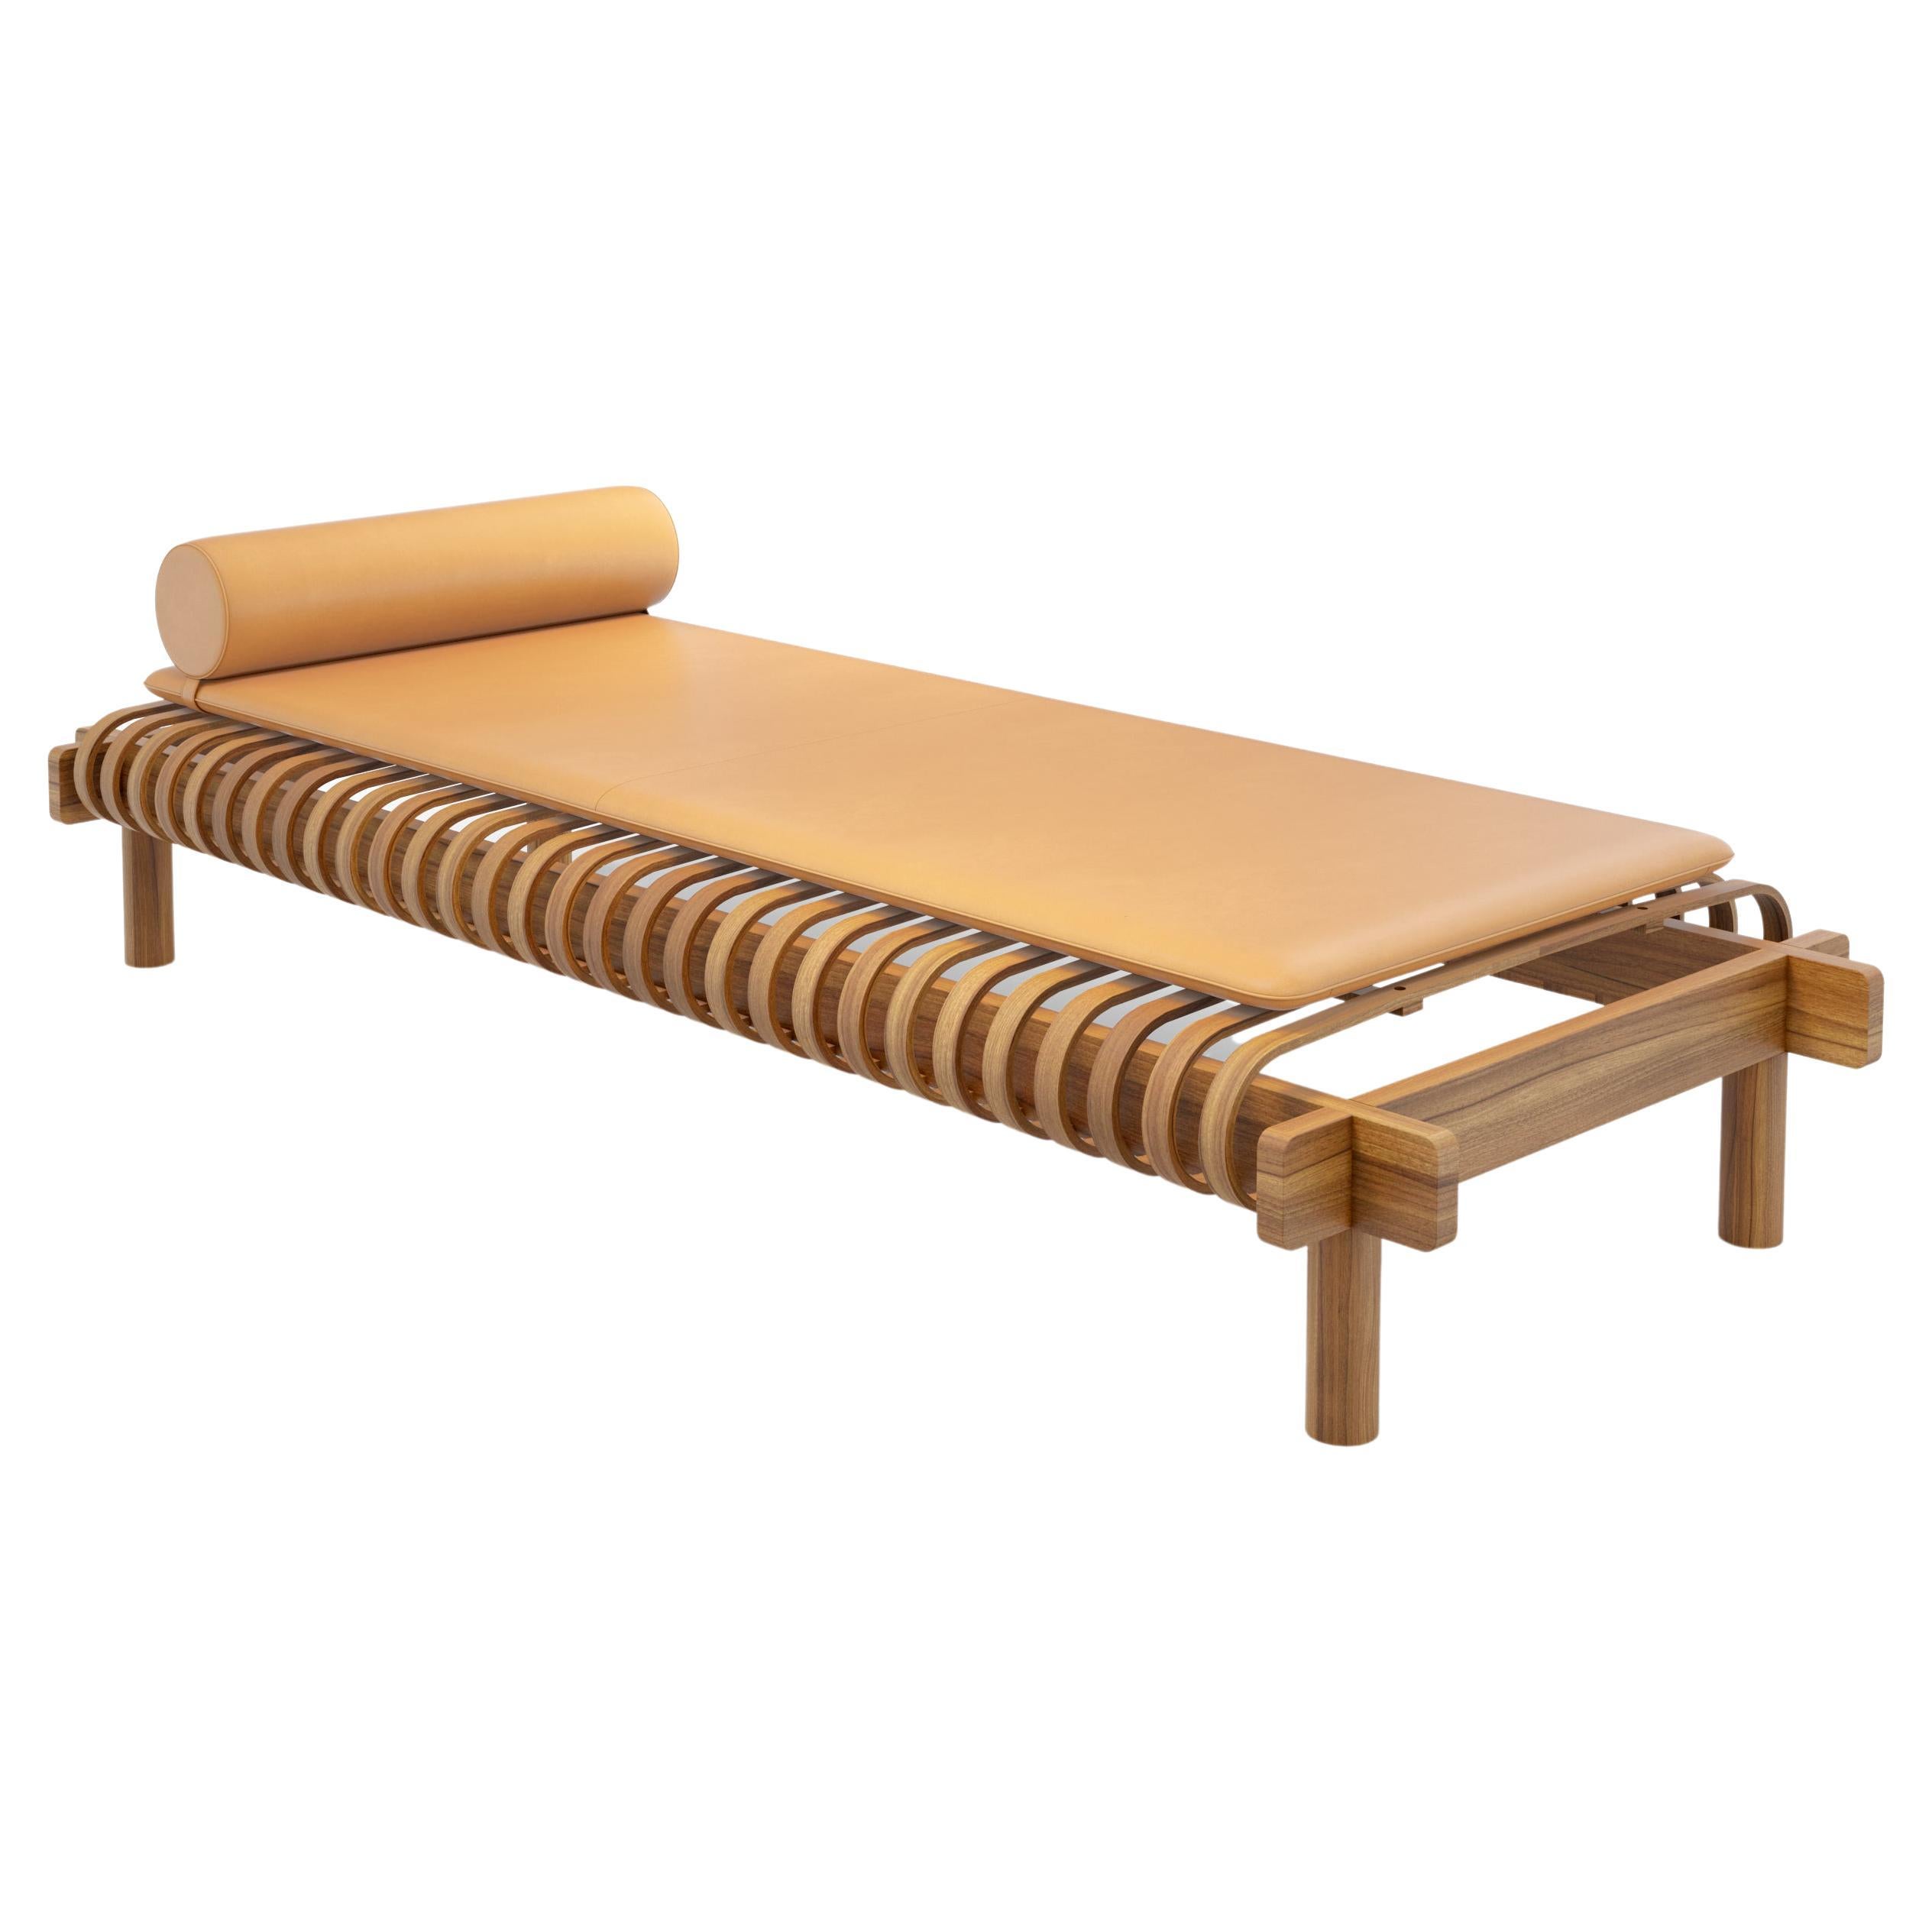 Limited Edition Charlotte Perriand Tokyo Dormeuse by Cassina